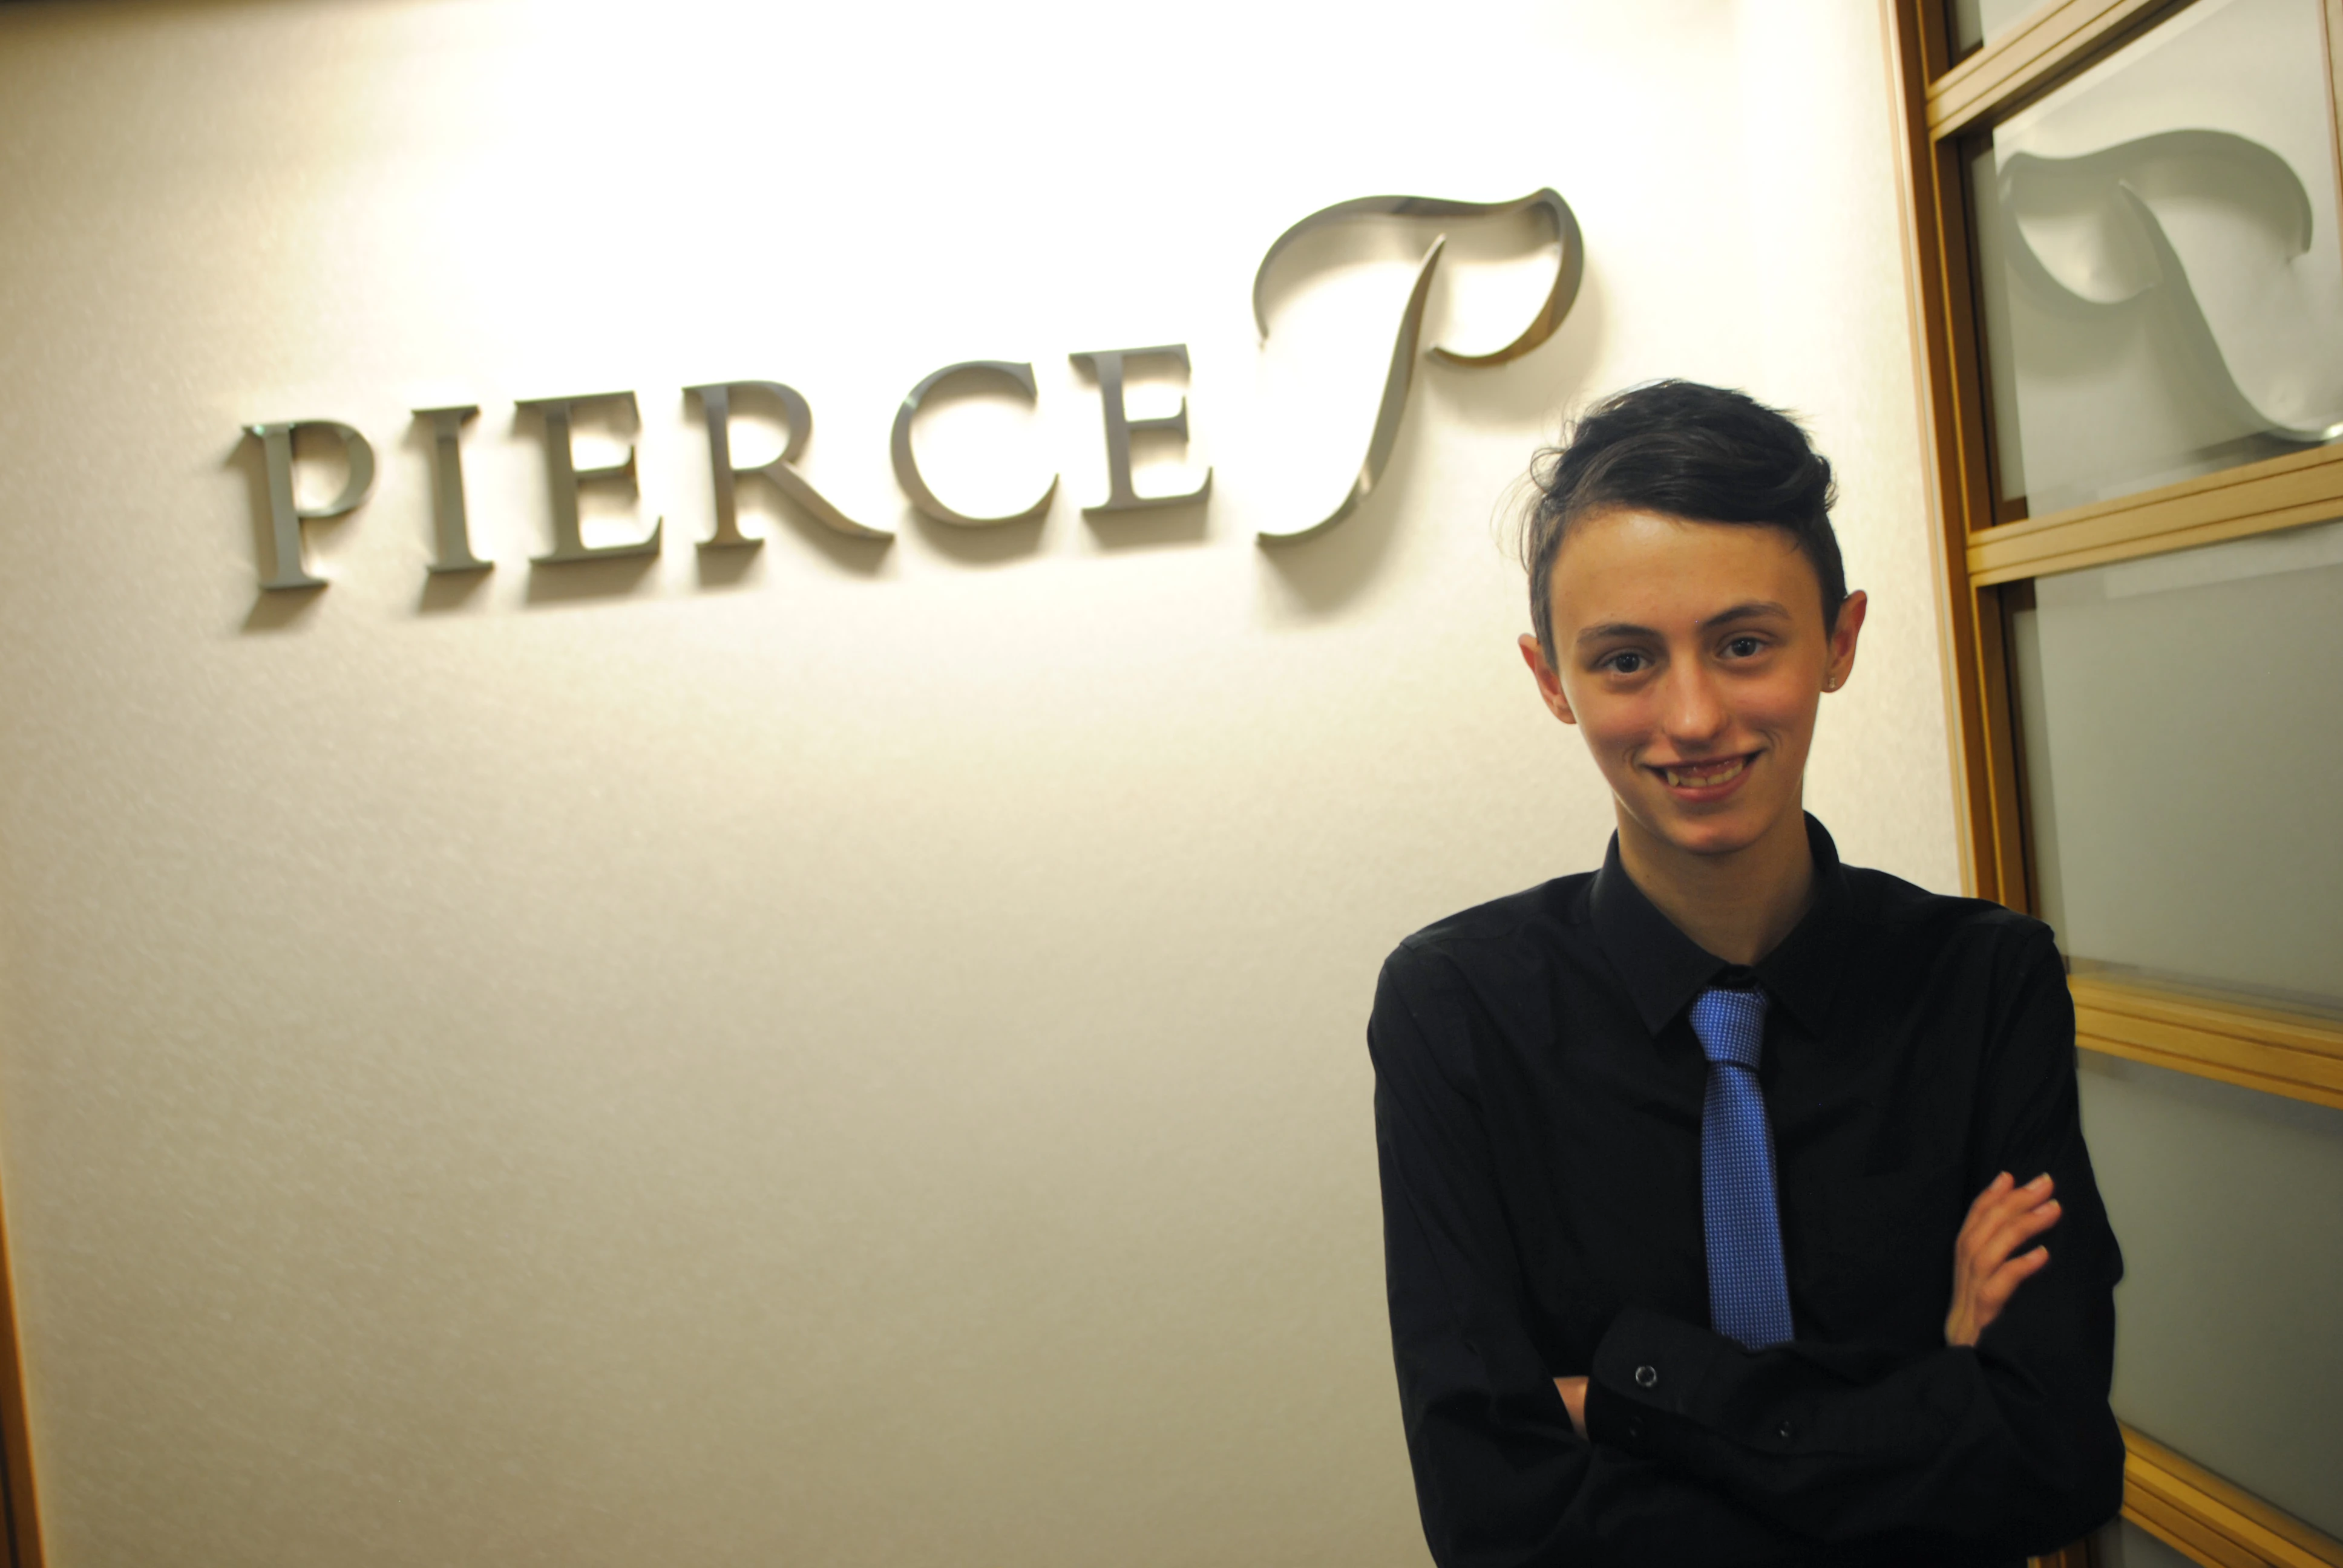 Layton Smalley has been promoted to payroll assistant at Pierce after completing his apprenticeship.